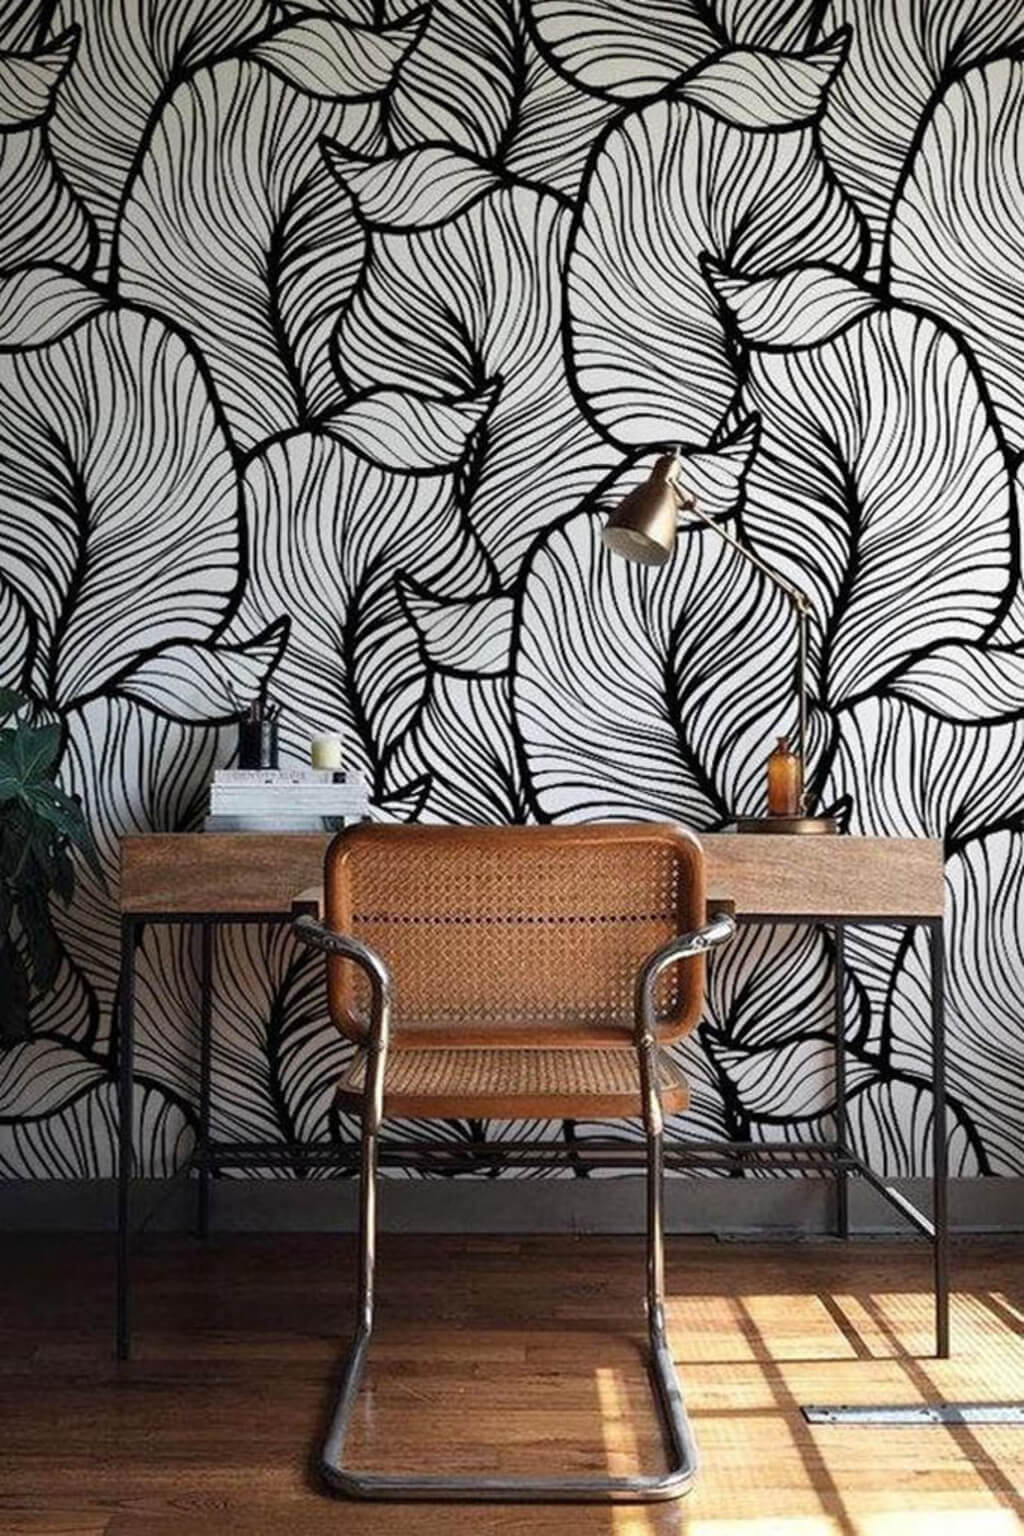 A Wall of Wallpaper decoration